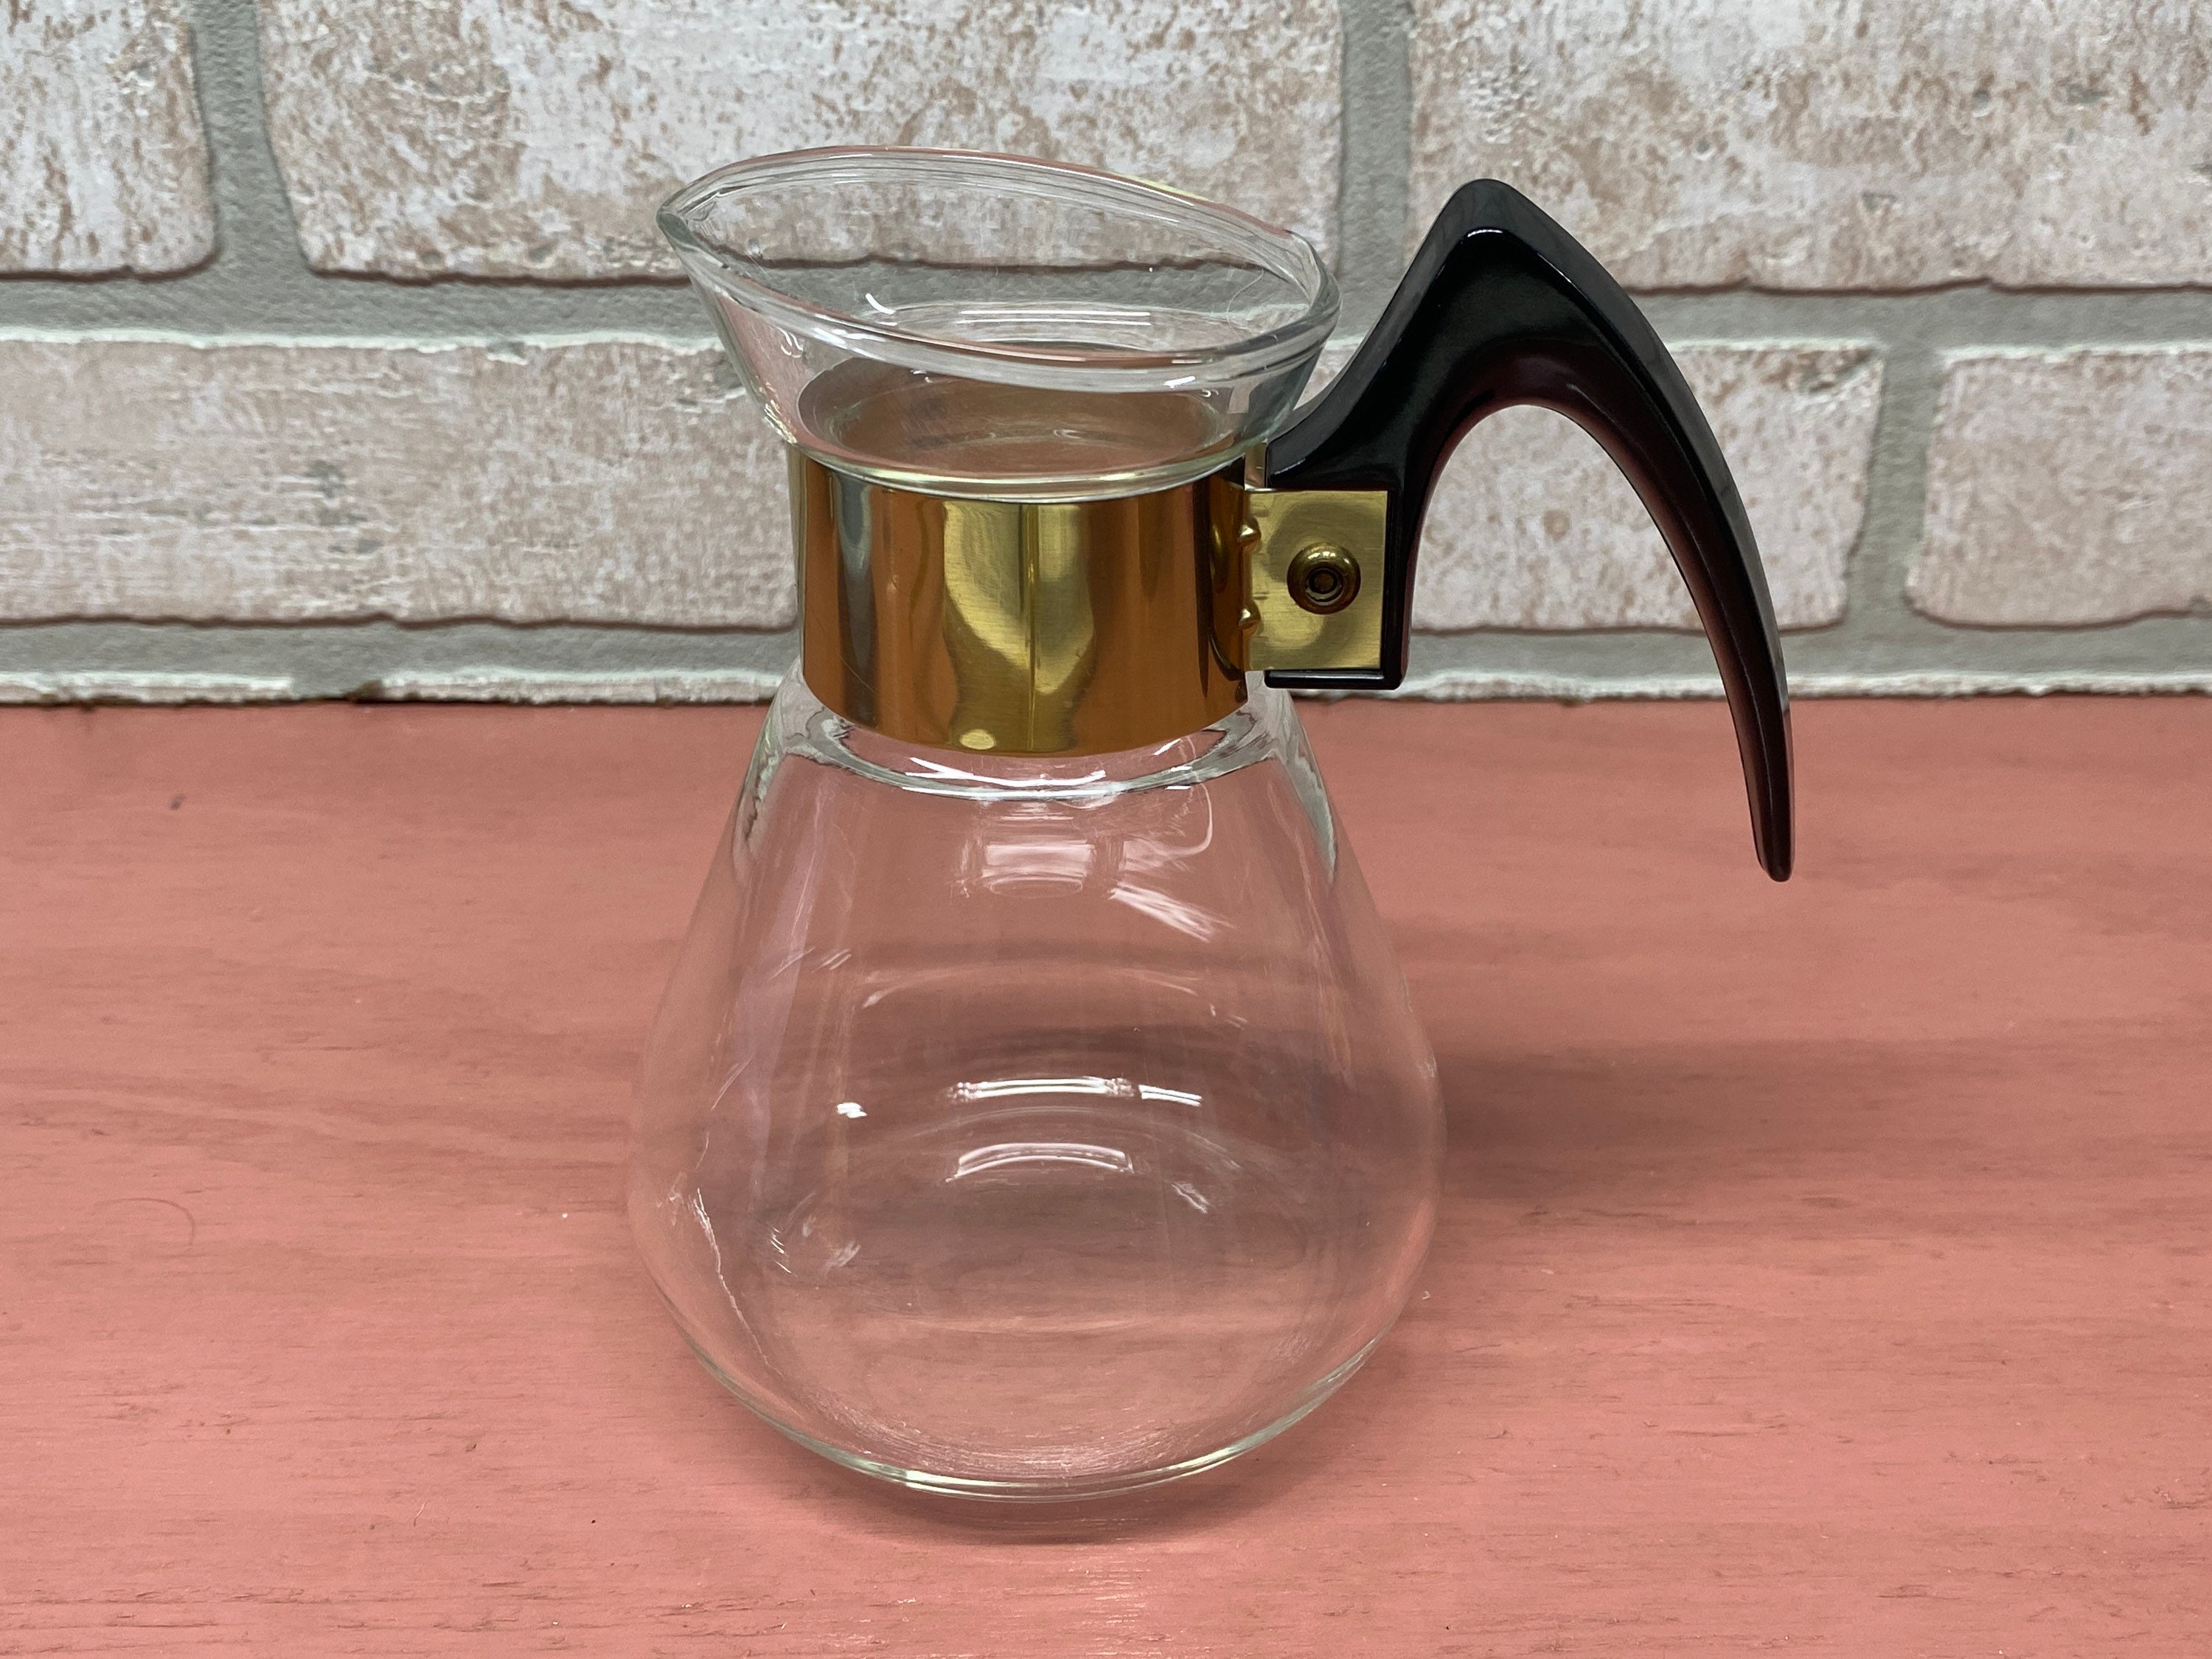 Vintage Small Handled Glass Carafe, Corning Heat Proof Glass